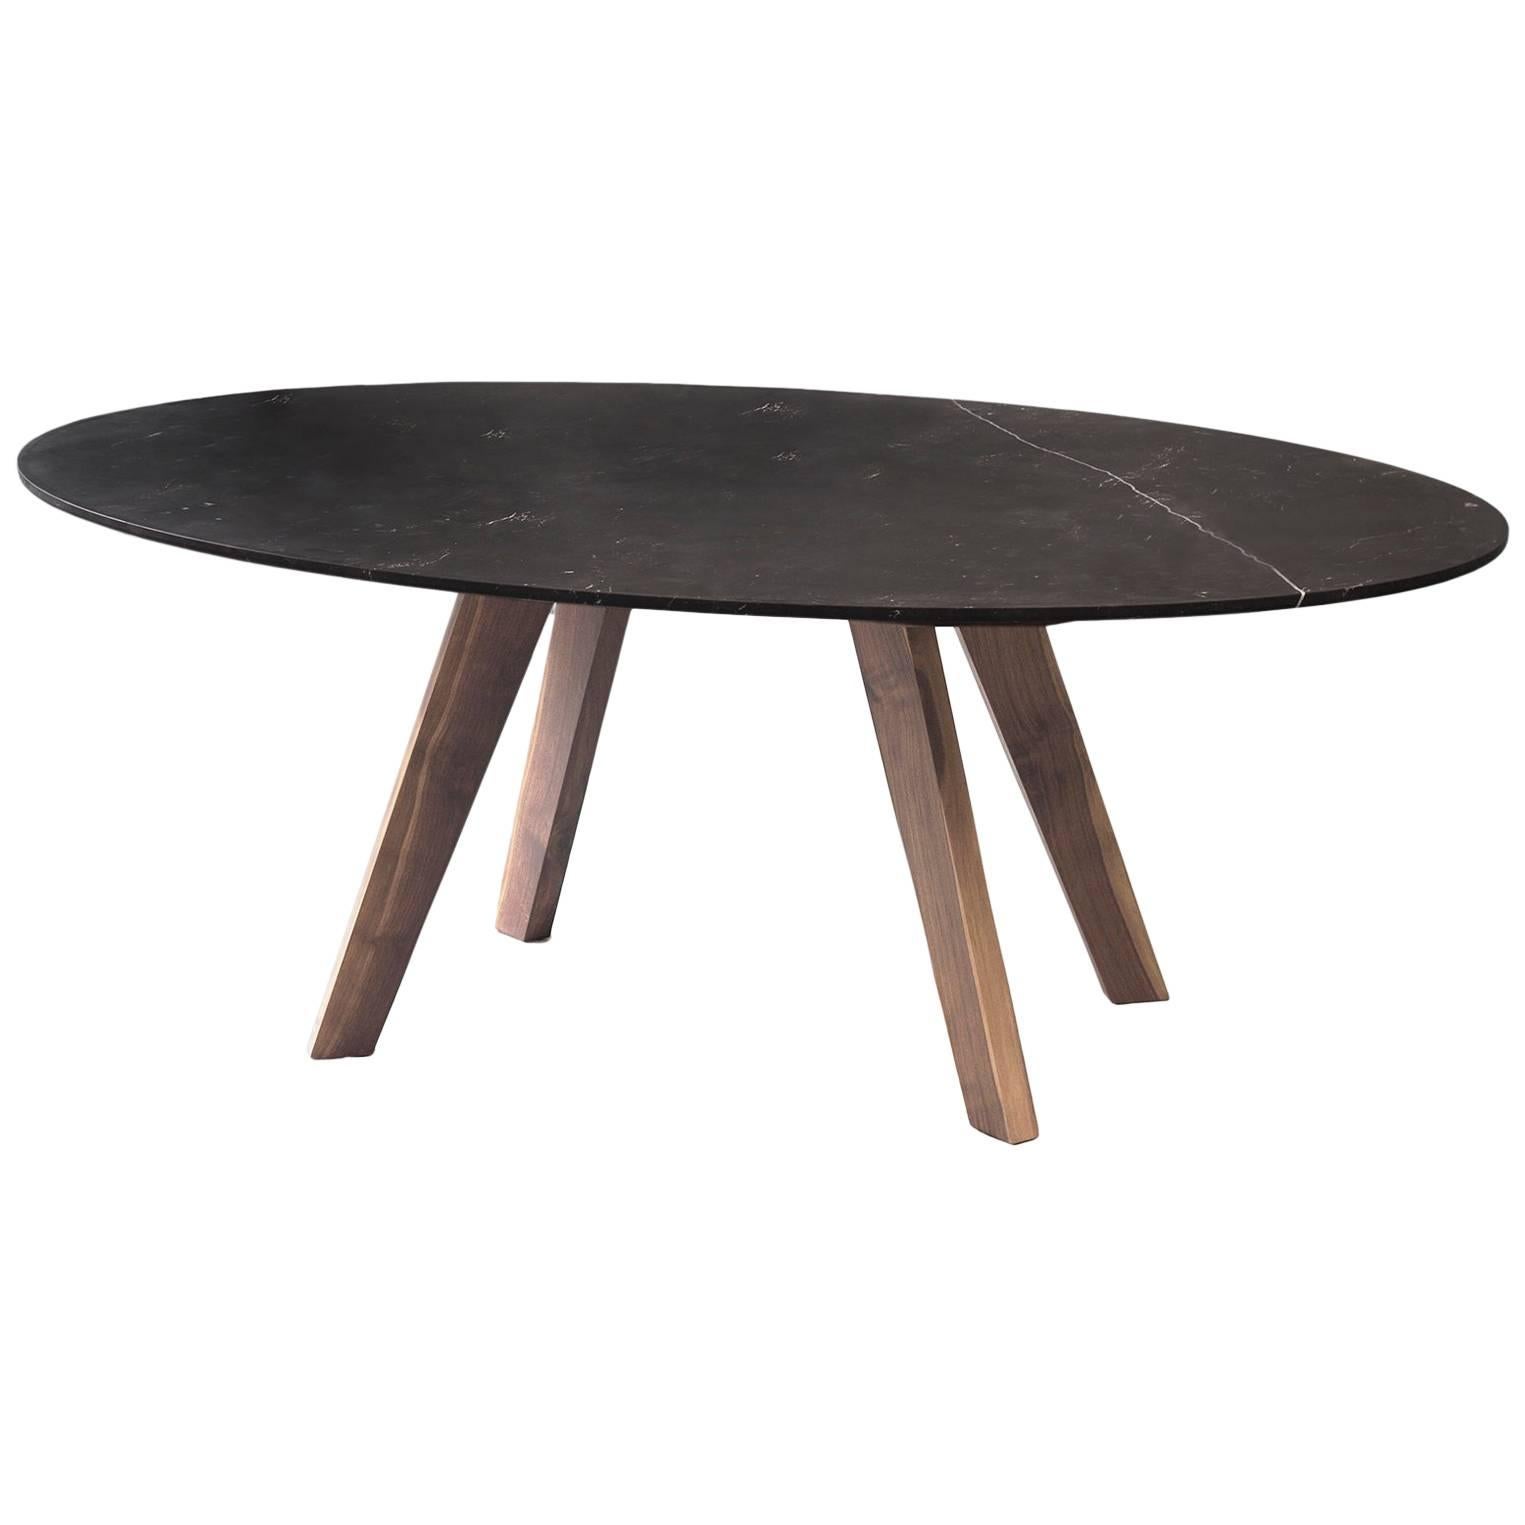 Contemporary Oval Table, Granite, and Walnut, Designed by LCMX For Sale